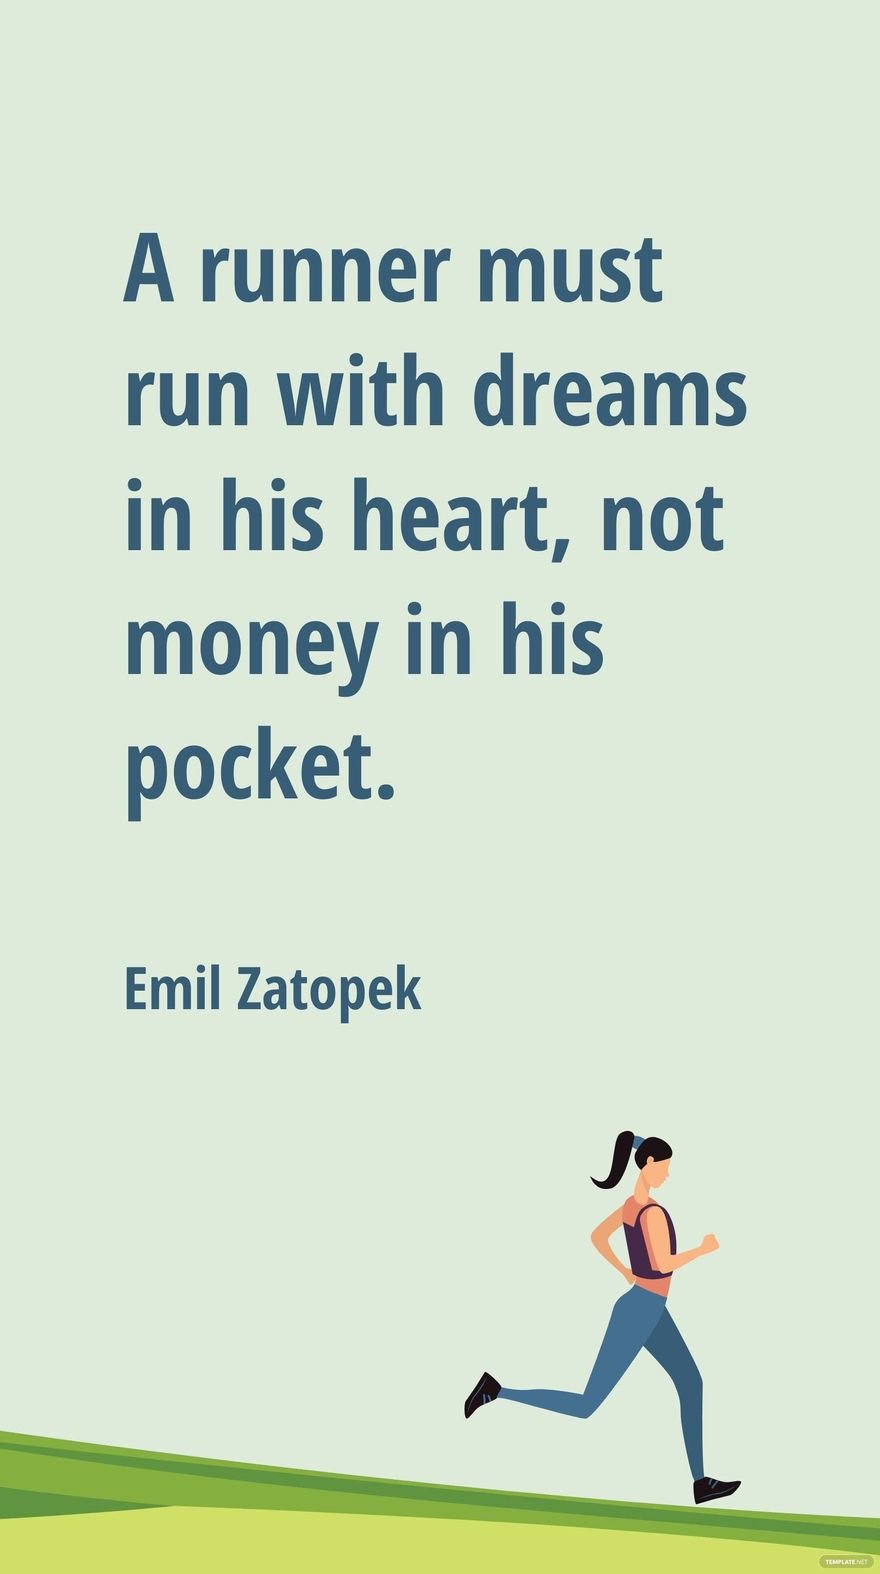 Emil Zatopek - A runner must run with dreams in his heart, not money in his pocket.